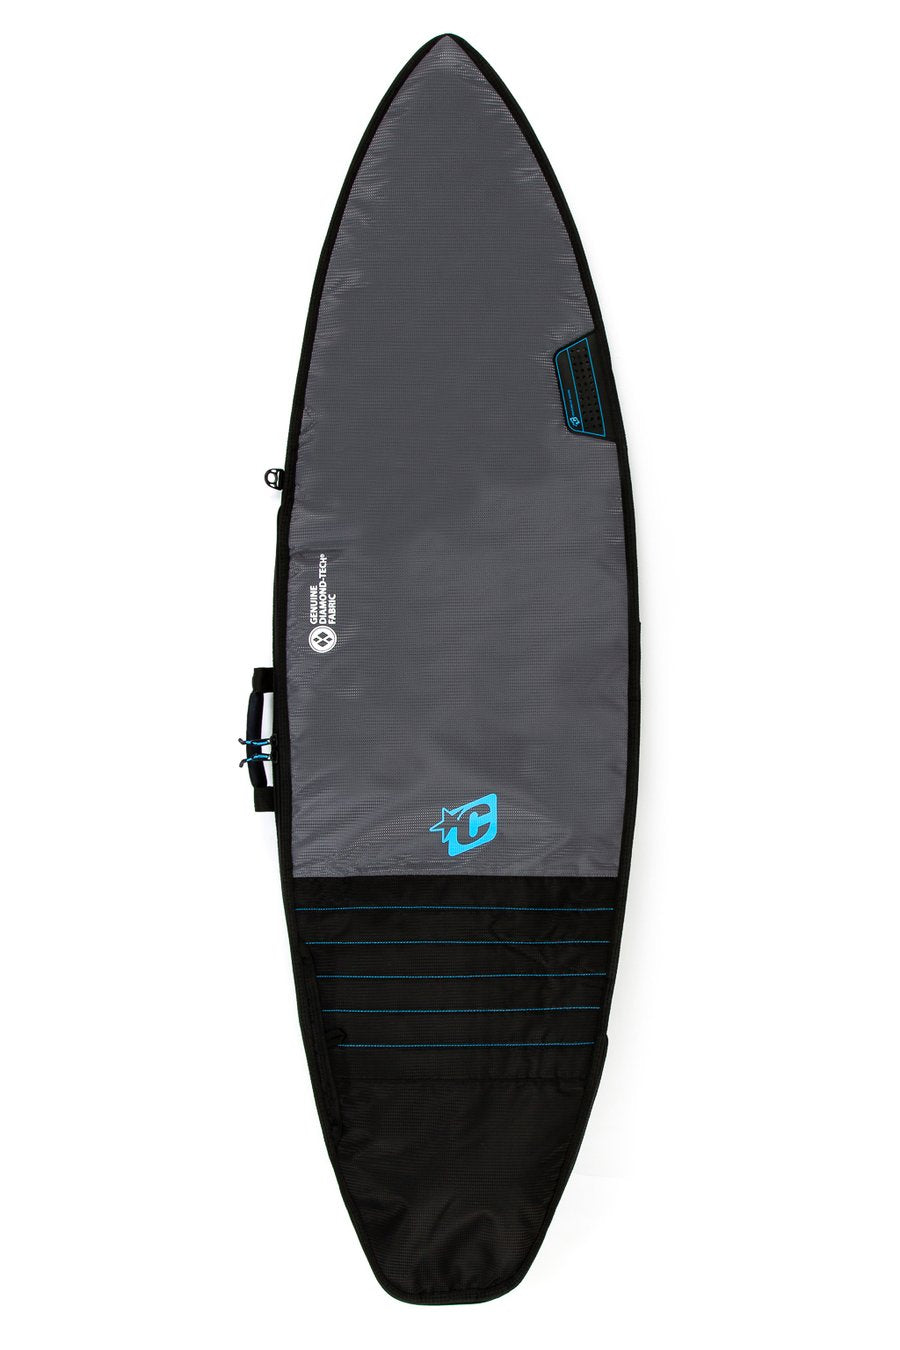 Creatures of Leisure - Shortboard Day Use: Charcoal Cyan 6'3"